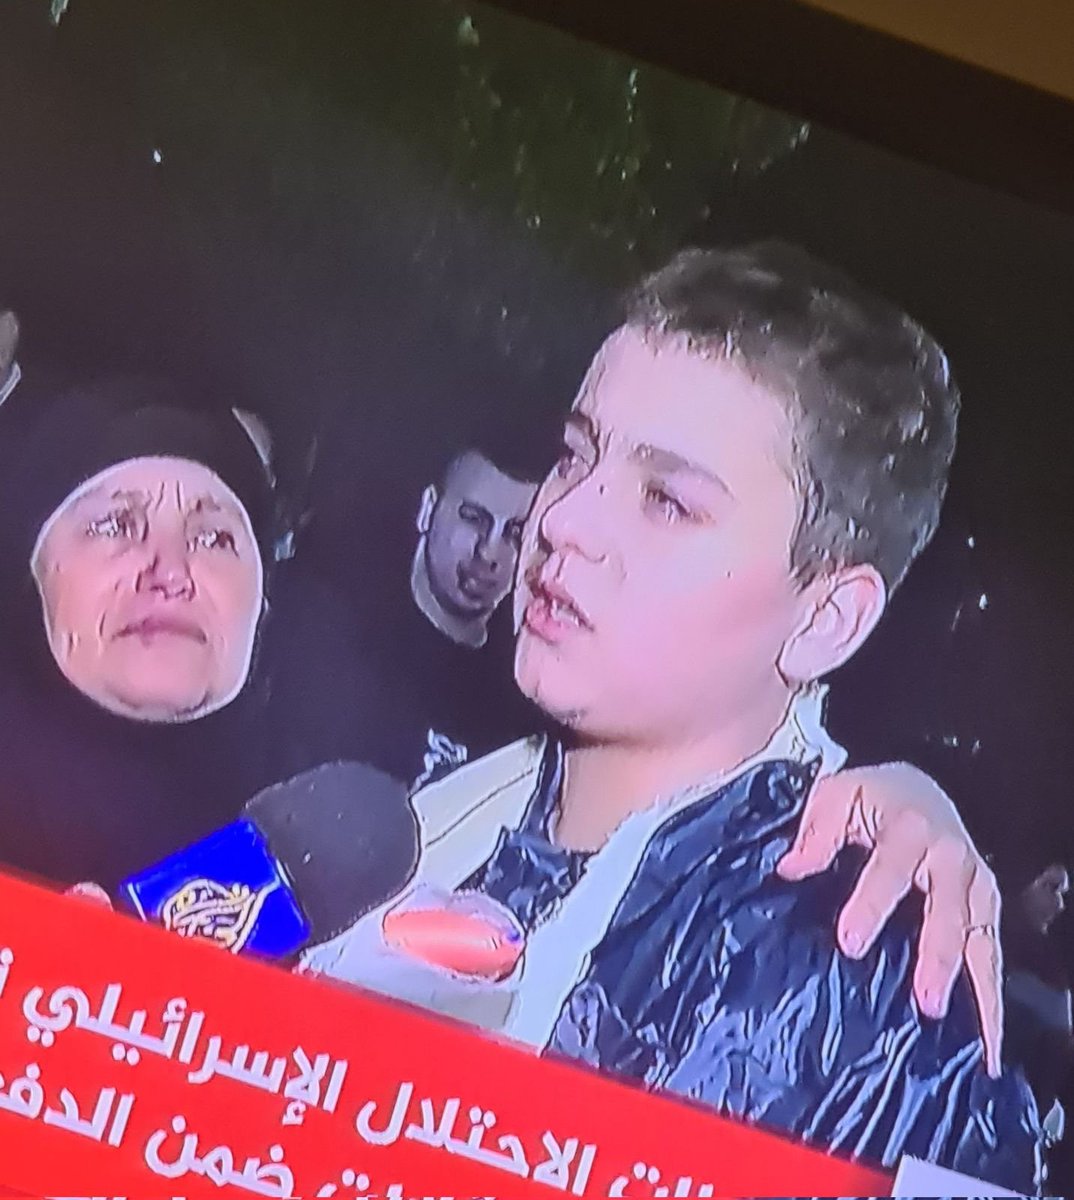 🚨BREAKING: RELEASED CHILD PRISONER SPEAKS ON CONDITIONS AFTER RELEASE Muhammad Nazzal: 'Elderlies died, and they were stomped and beaten. They broke my arm and finger last week. They beat me again today. They did not provide any medical treatment. The Red Cross only